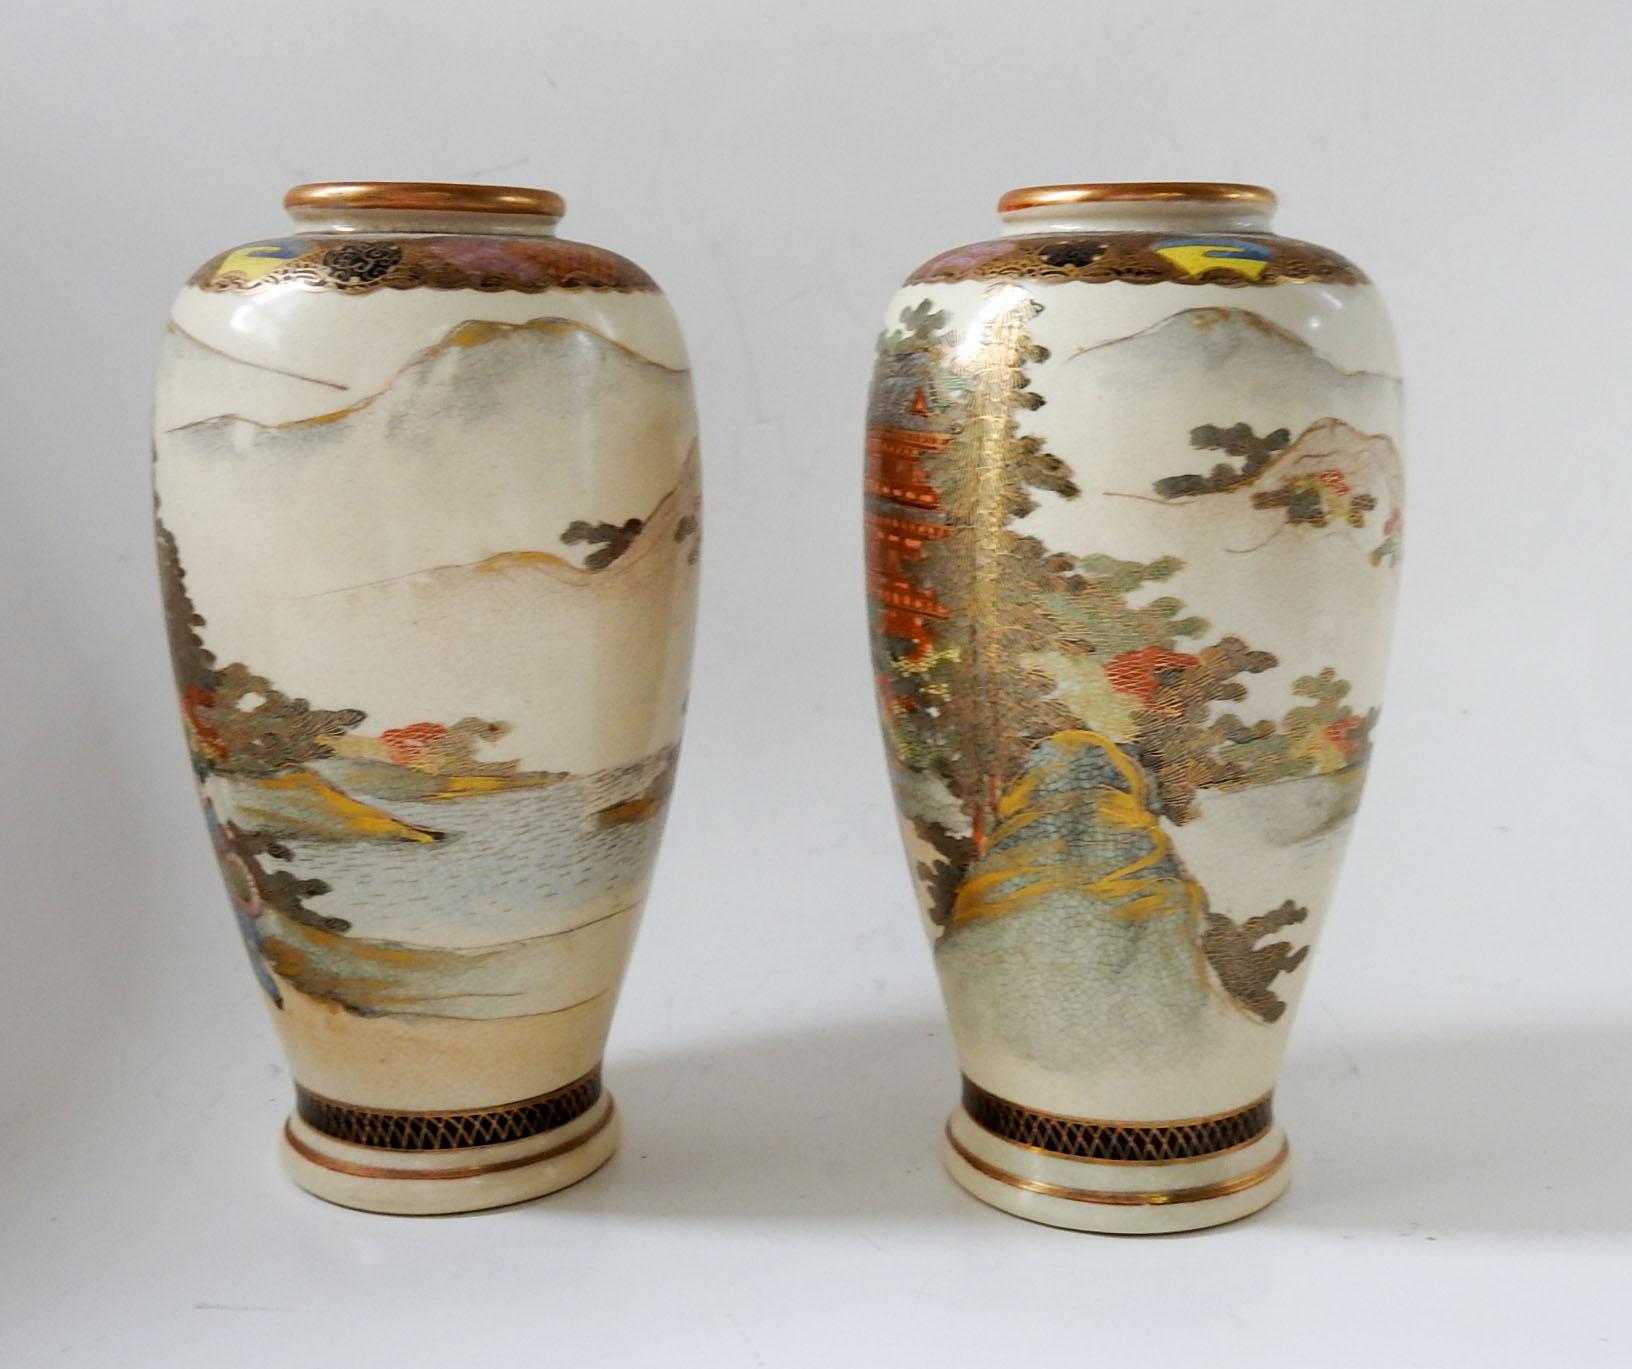 Circa 1900 pair of Satsuma vases.  Hand painted coastal landscape, mountains, women and children outside of elaborate homes. Signed on the bottom with the Shimazu Clan crest, wear to bottom.